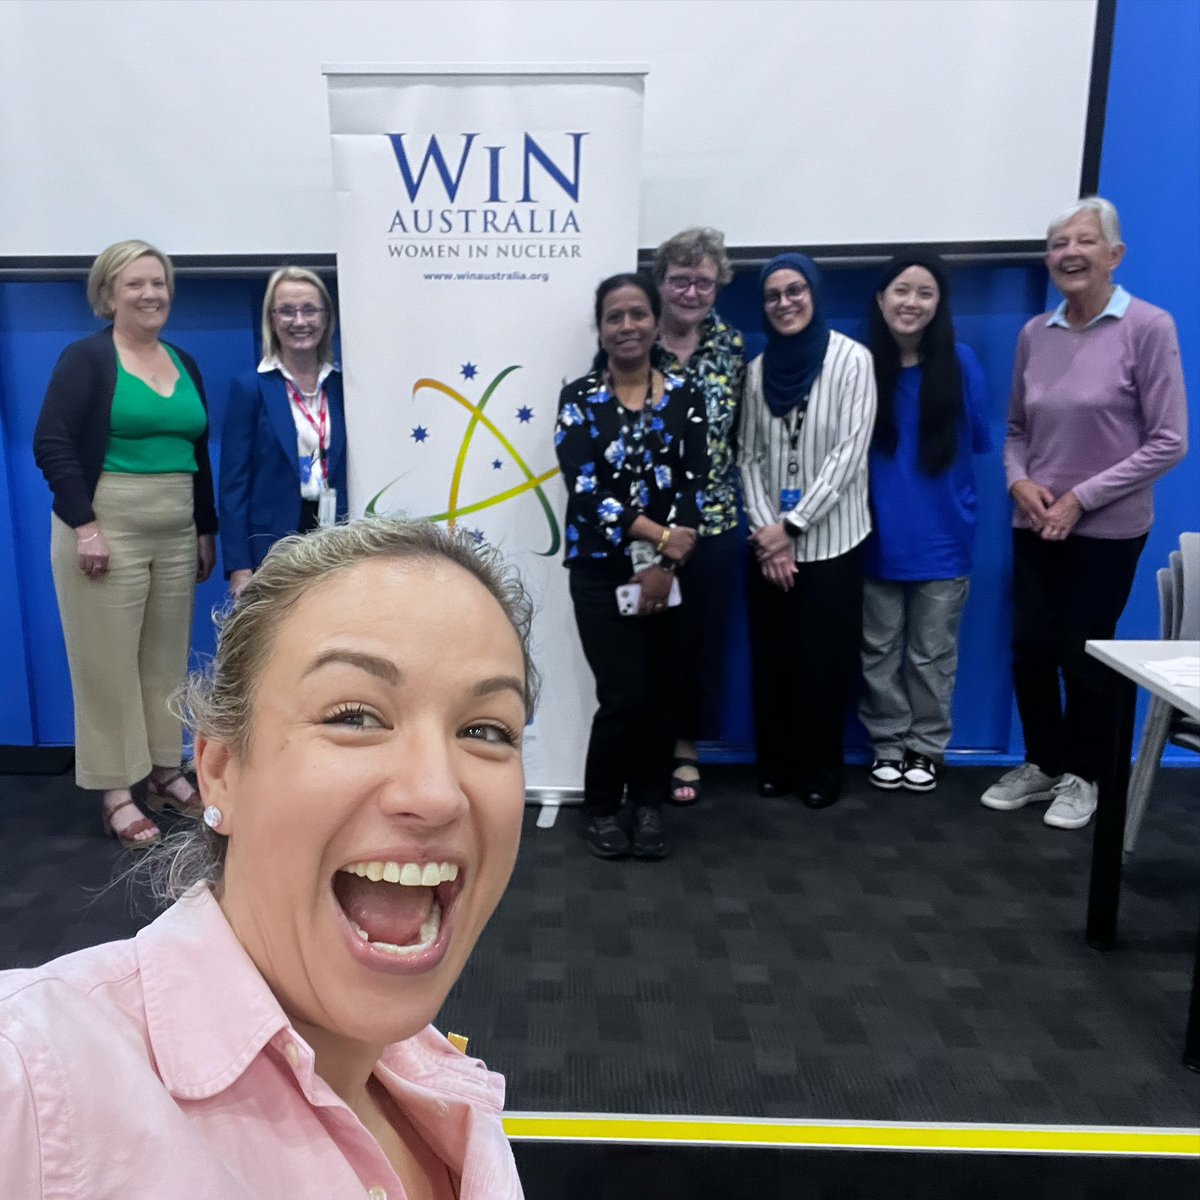 Thank you to our members for attending the WiN Australia AGM last week, either in person or virtually. We welcomed in the new committee for 2024 and look forward to seeing more of you at events in the year to come. #WiNAustAGM2023 #Womeninnuclear